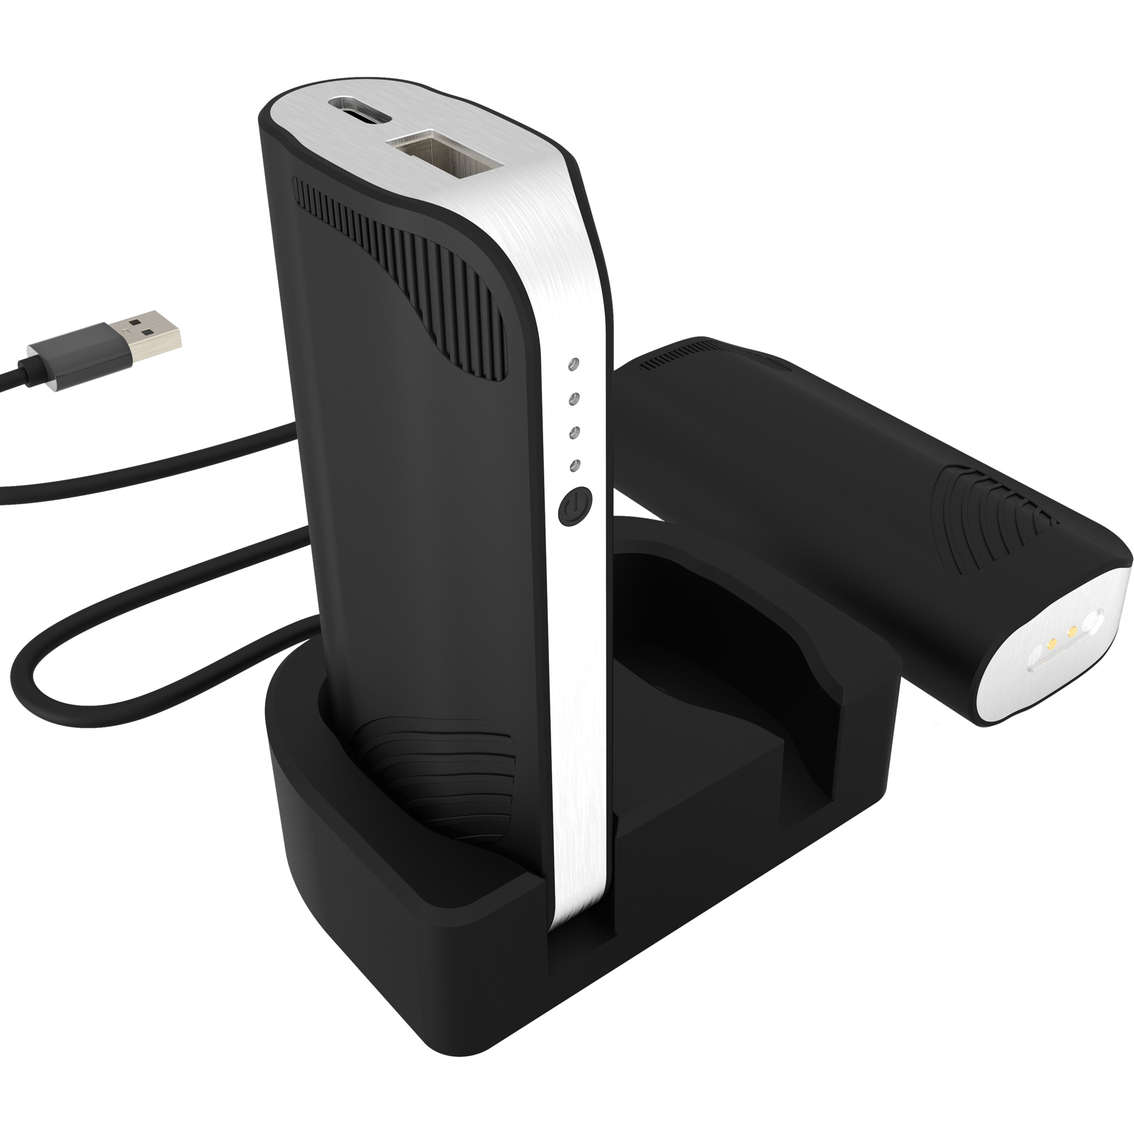 Digipower Twin Power Banks with Wireless Charging Station - Image 2 of 2